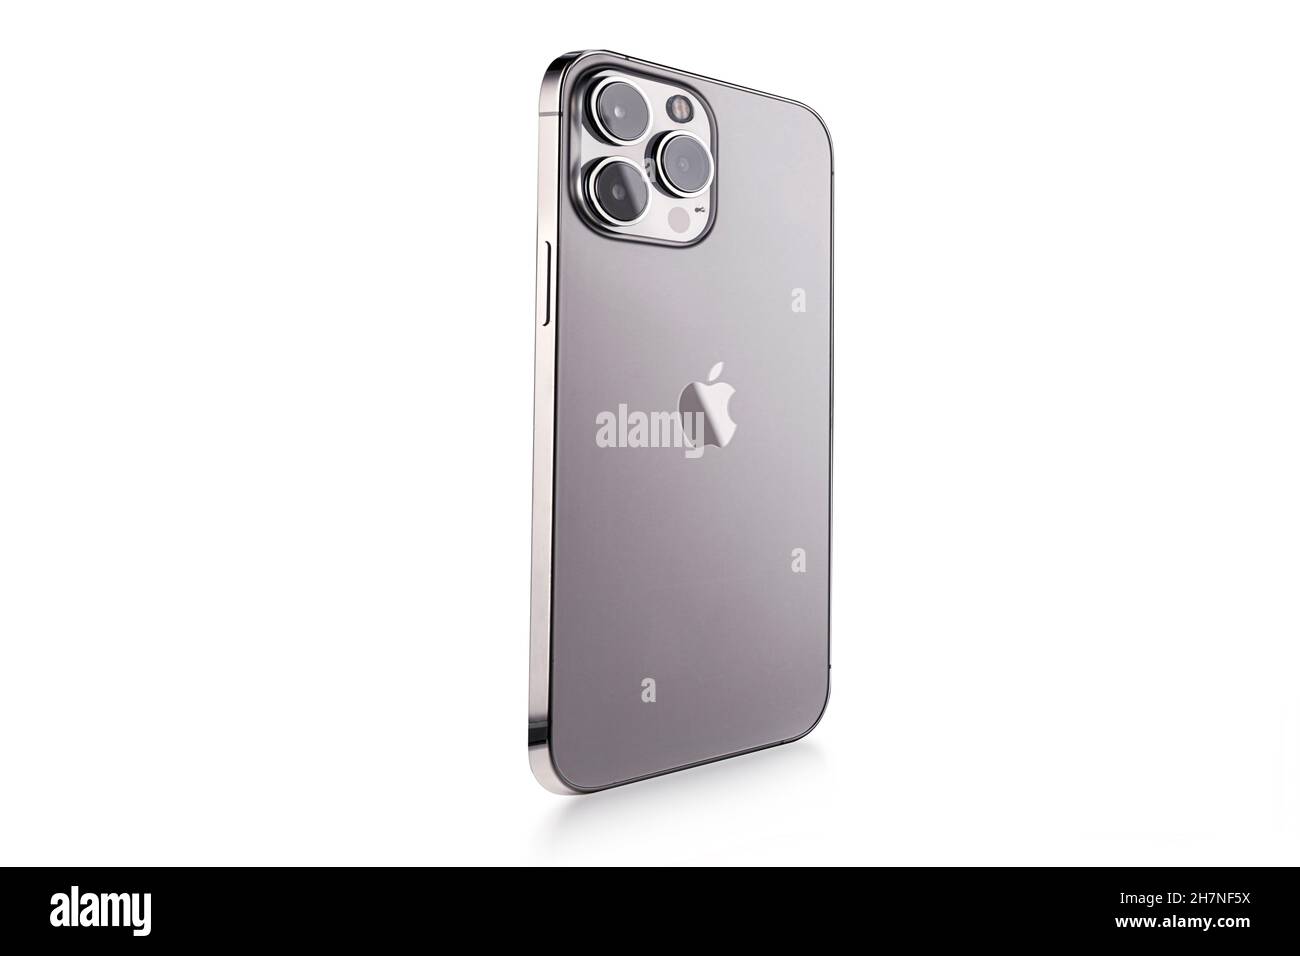 the new Iphone 13 promax with a system of three new cameras for photo and video shooting, the color gray space, a new smartphone from Apple close-up o Stock Photo